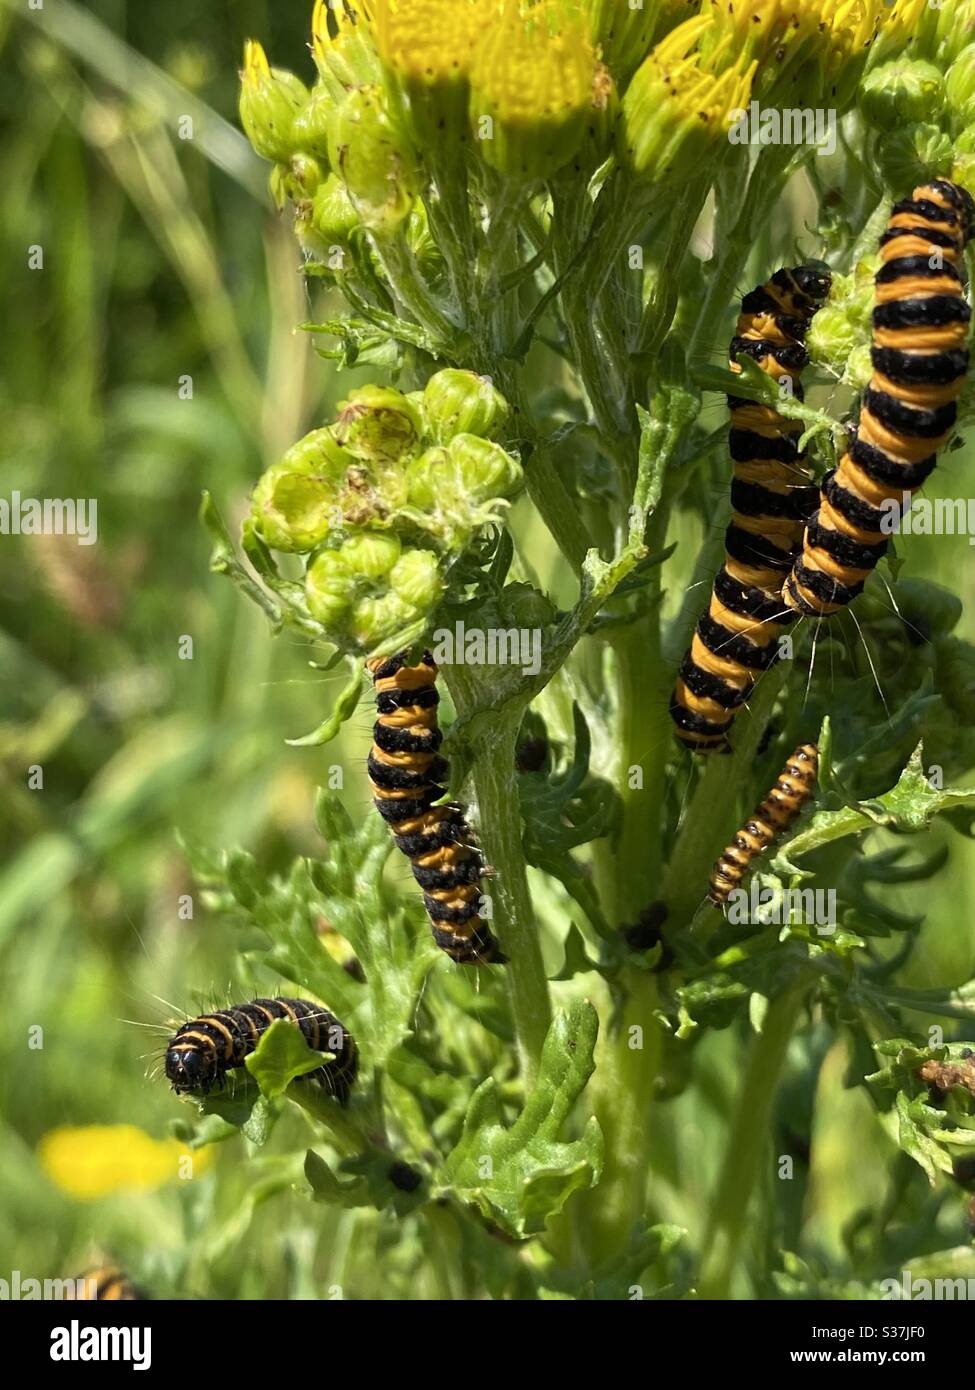 Caterpillars on a plant in their natural habitat Stock Photo